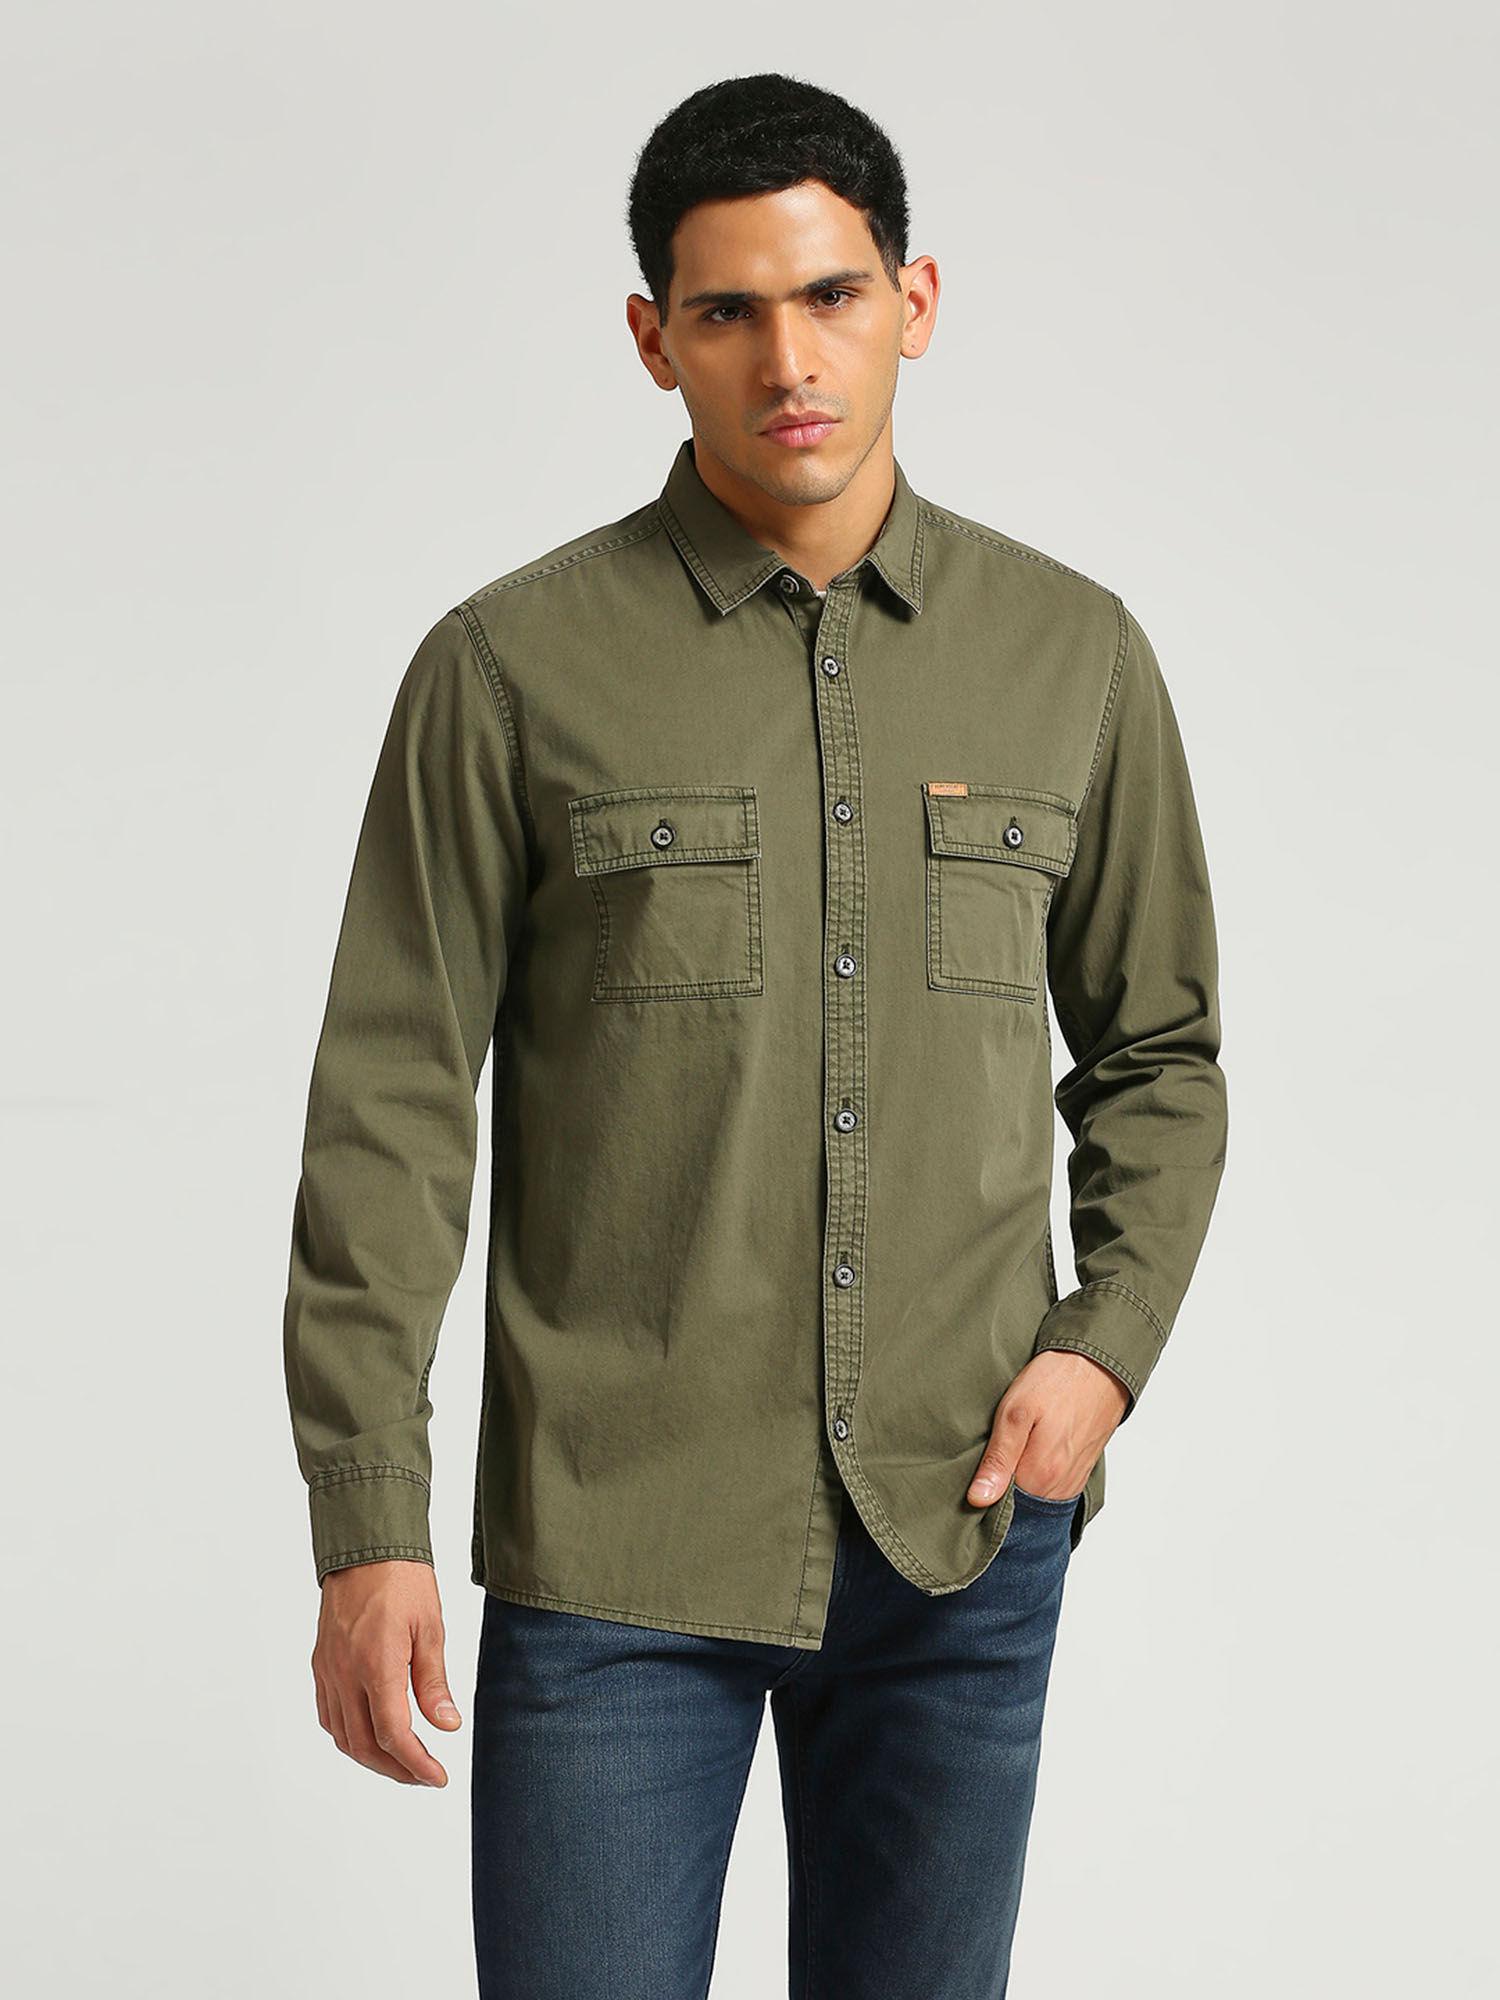 dept solid over dye twill shirt